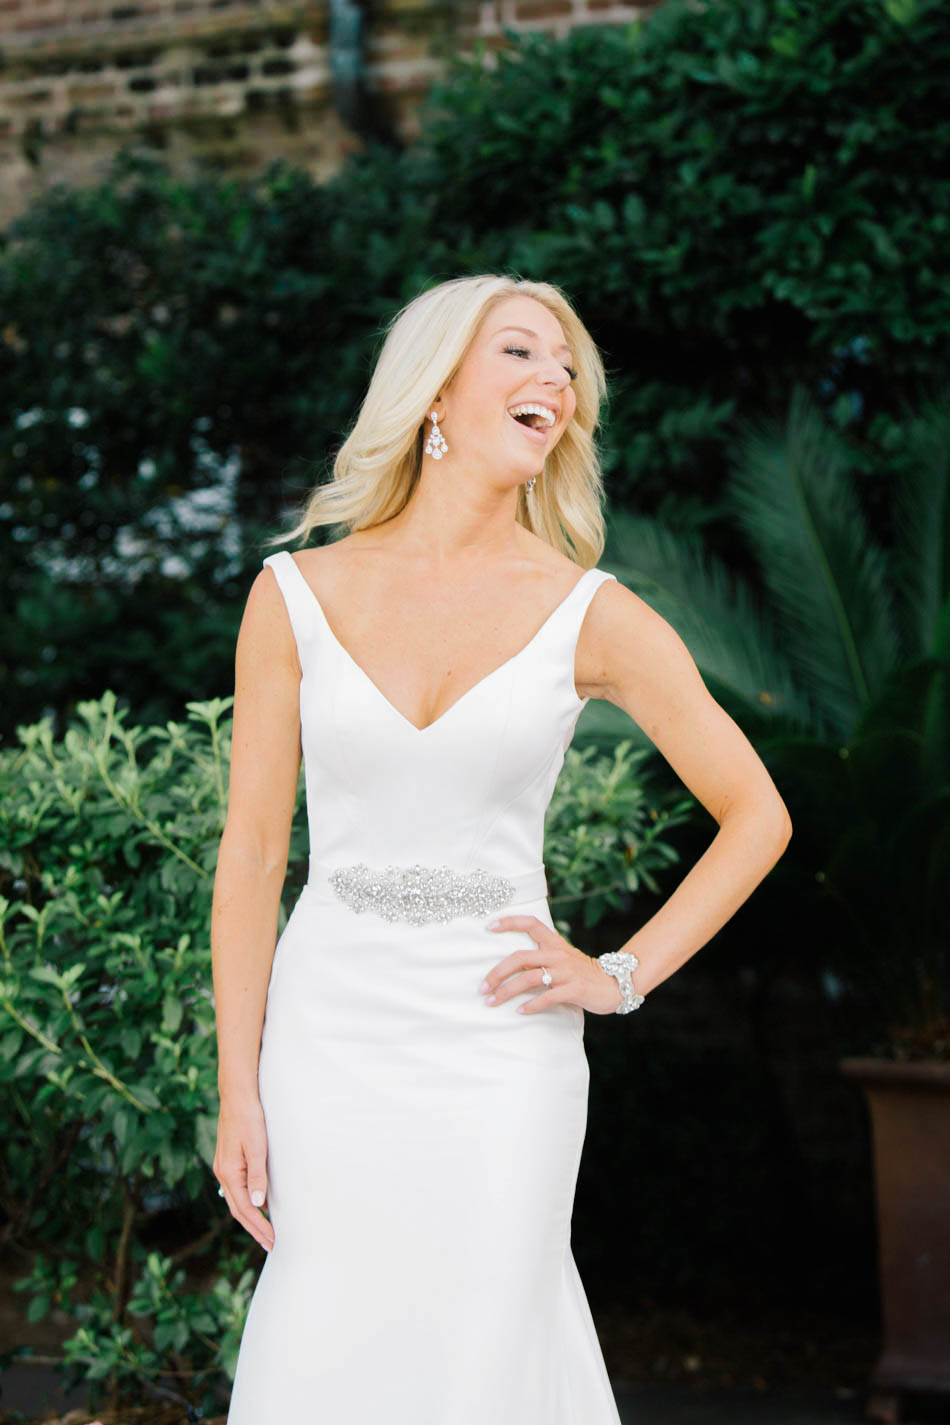 Bride smiles at the Rice Mill Building, Charleston, South Carolina Kate Timbers Photography. http://katetimbers.com #katetimbersphotography // Charleston Photography // Inspiration